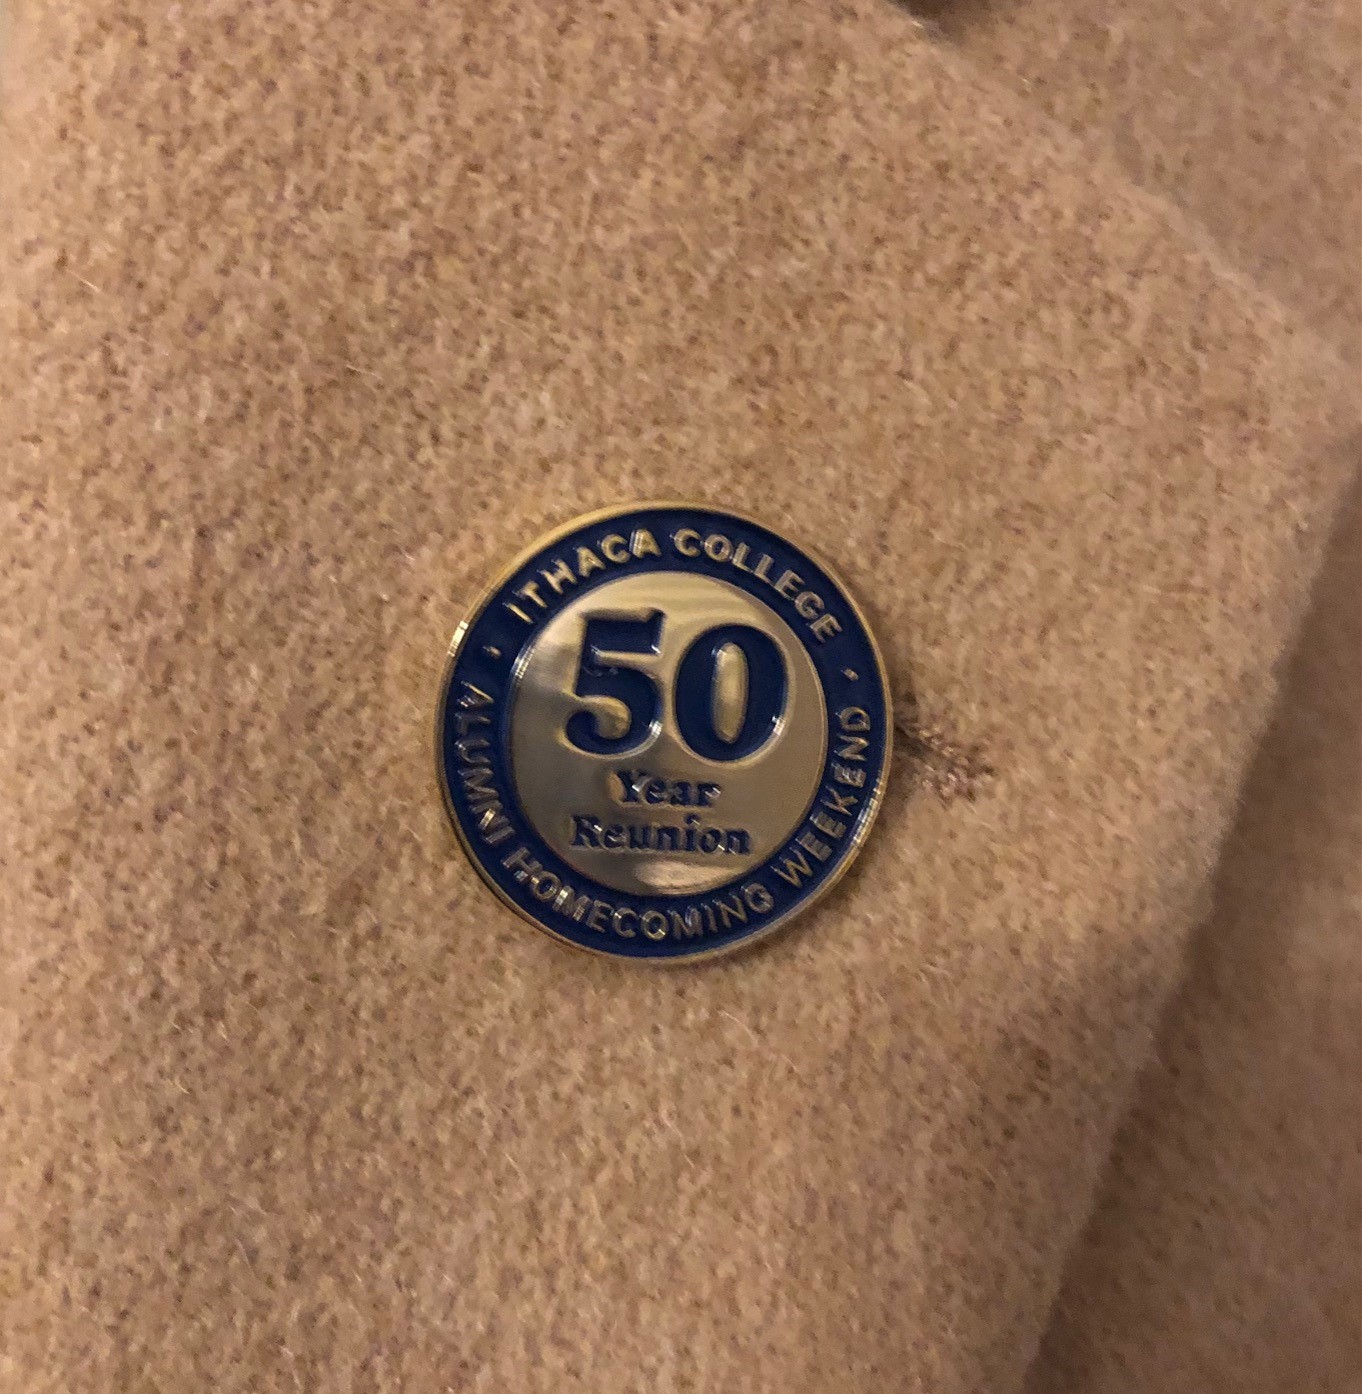 Three Things I Discovered at My 50th College Reunion